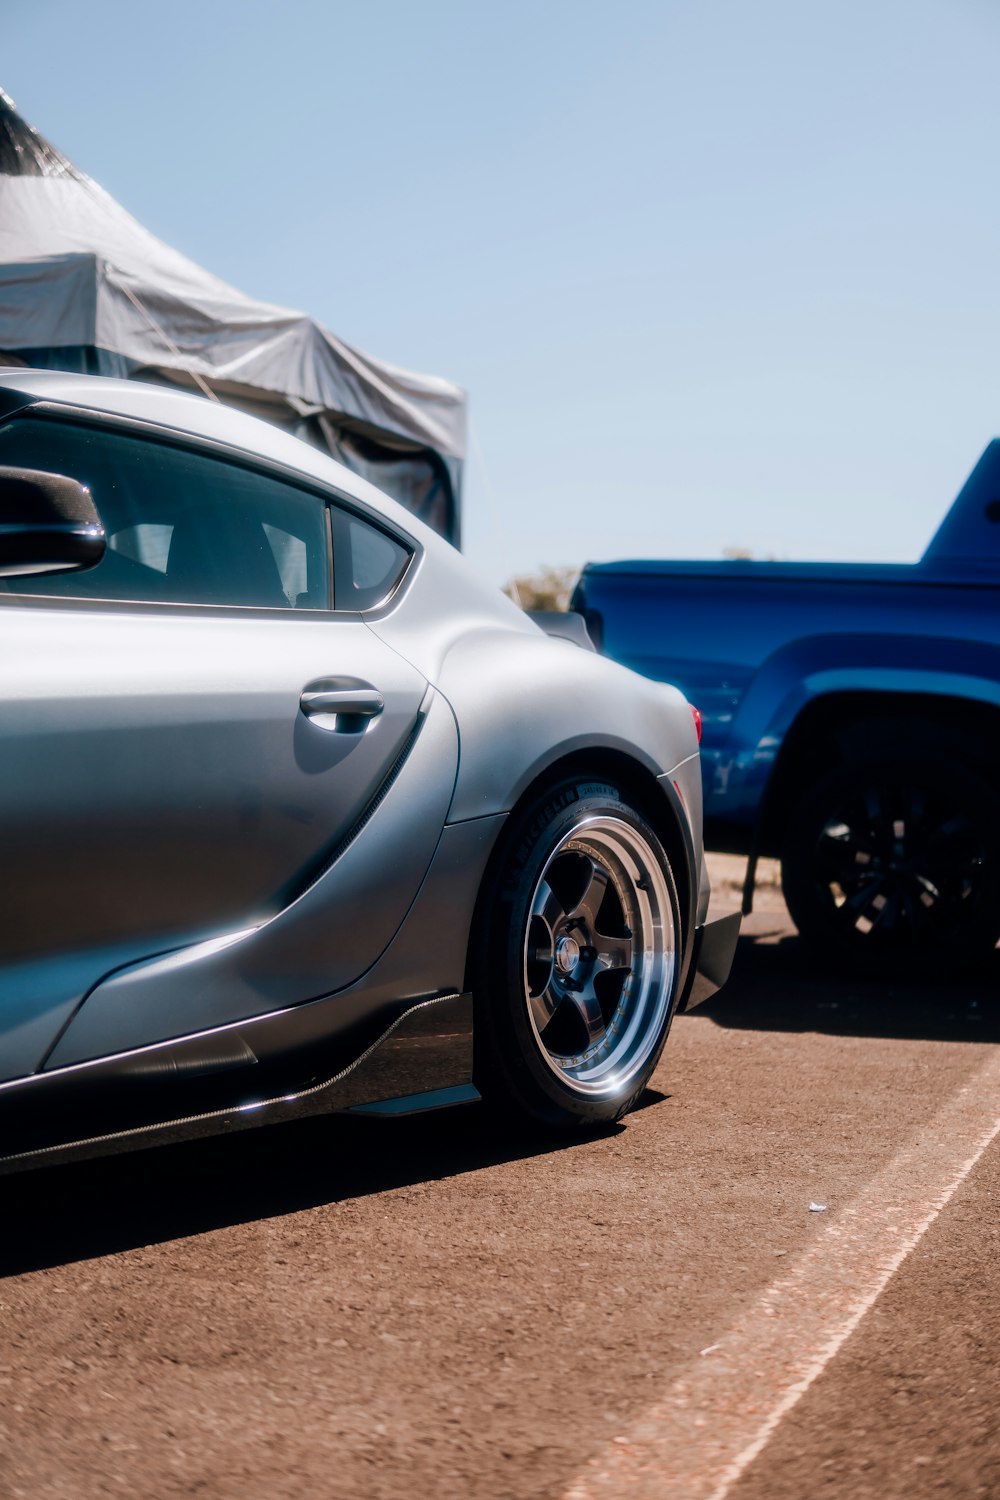 a silver sports car parked next to a blue truck